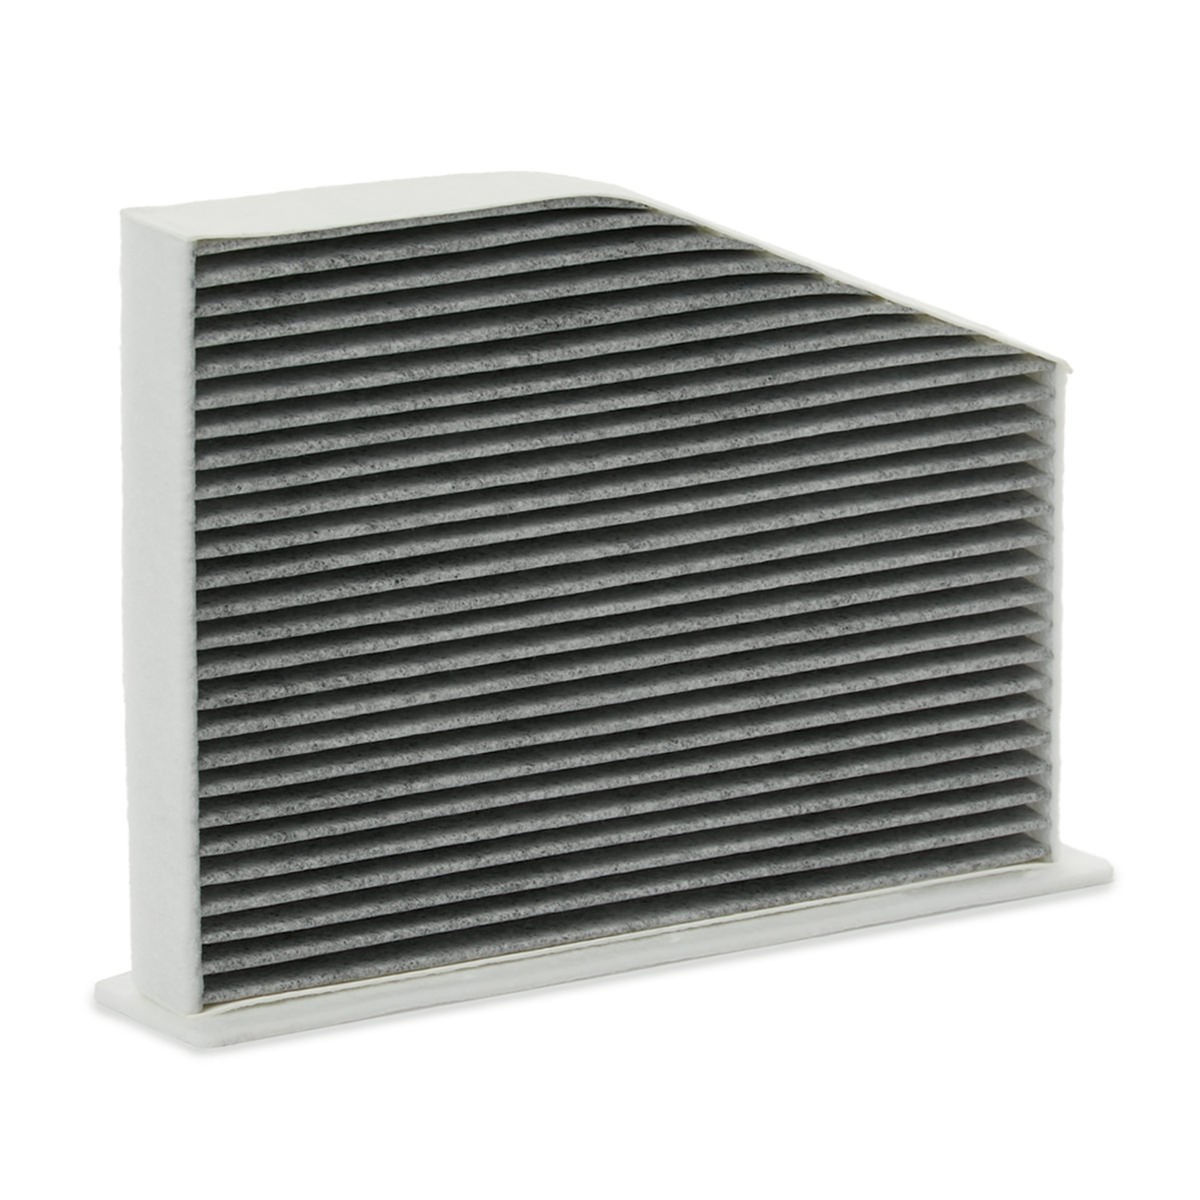 6791310000 HENGST FILTER Activated Carbon Filter, 288 mm x 213 mm x 58 mm Width: 213mm, Height: 58mm, Length: 288mm Cabin filter E998LC-R buy